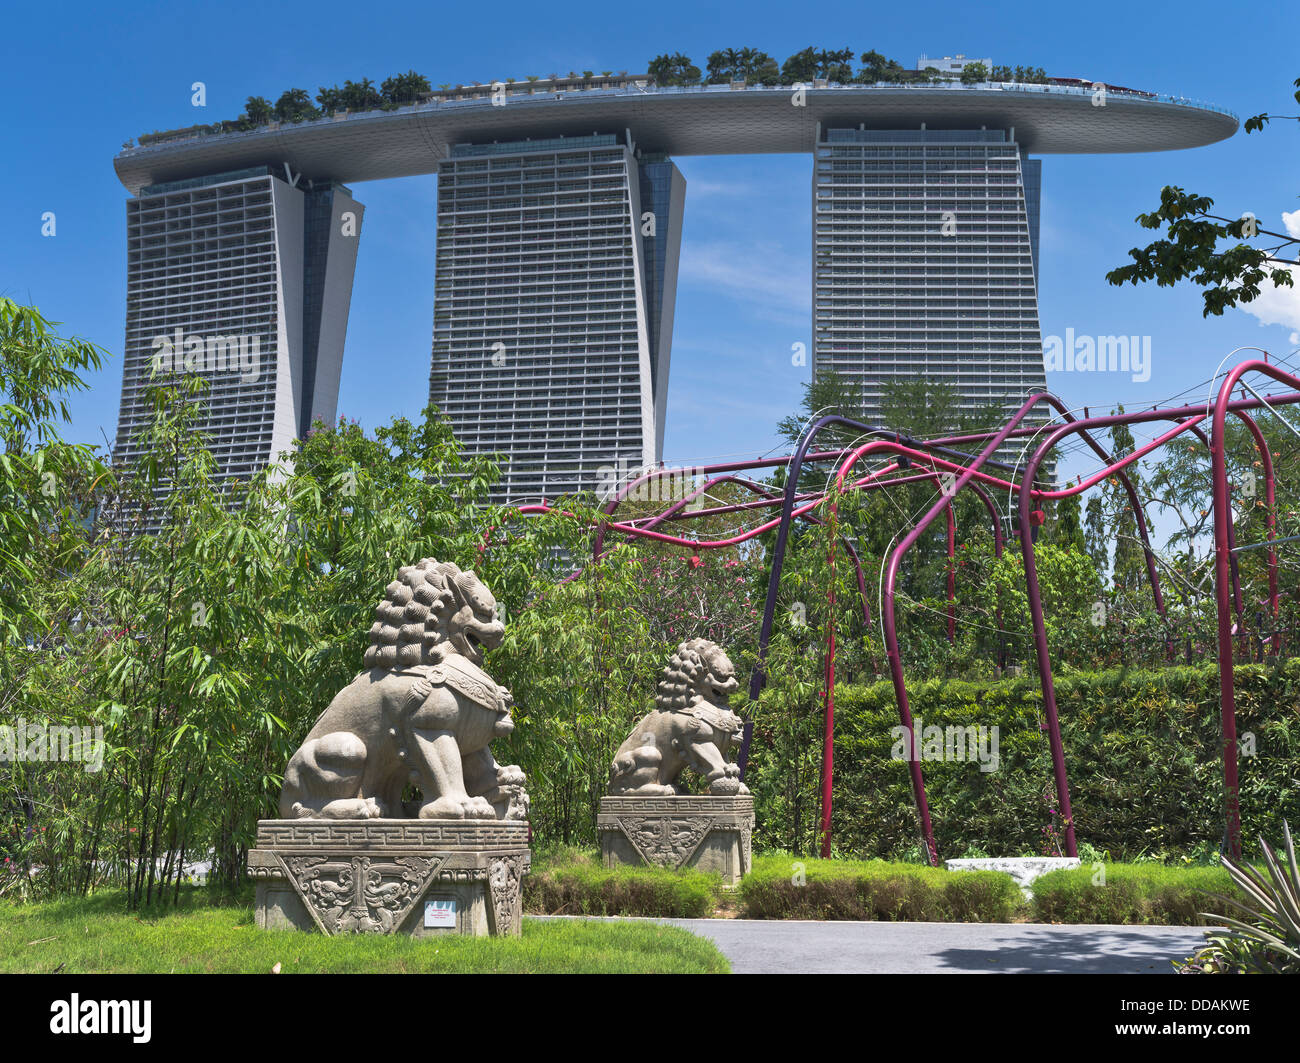 dh  GARDENS BY THE BAY SINGAPORE Gardens walkway fu dog lion statues statue skyscraper garden skyscrapers park Stock Photo